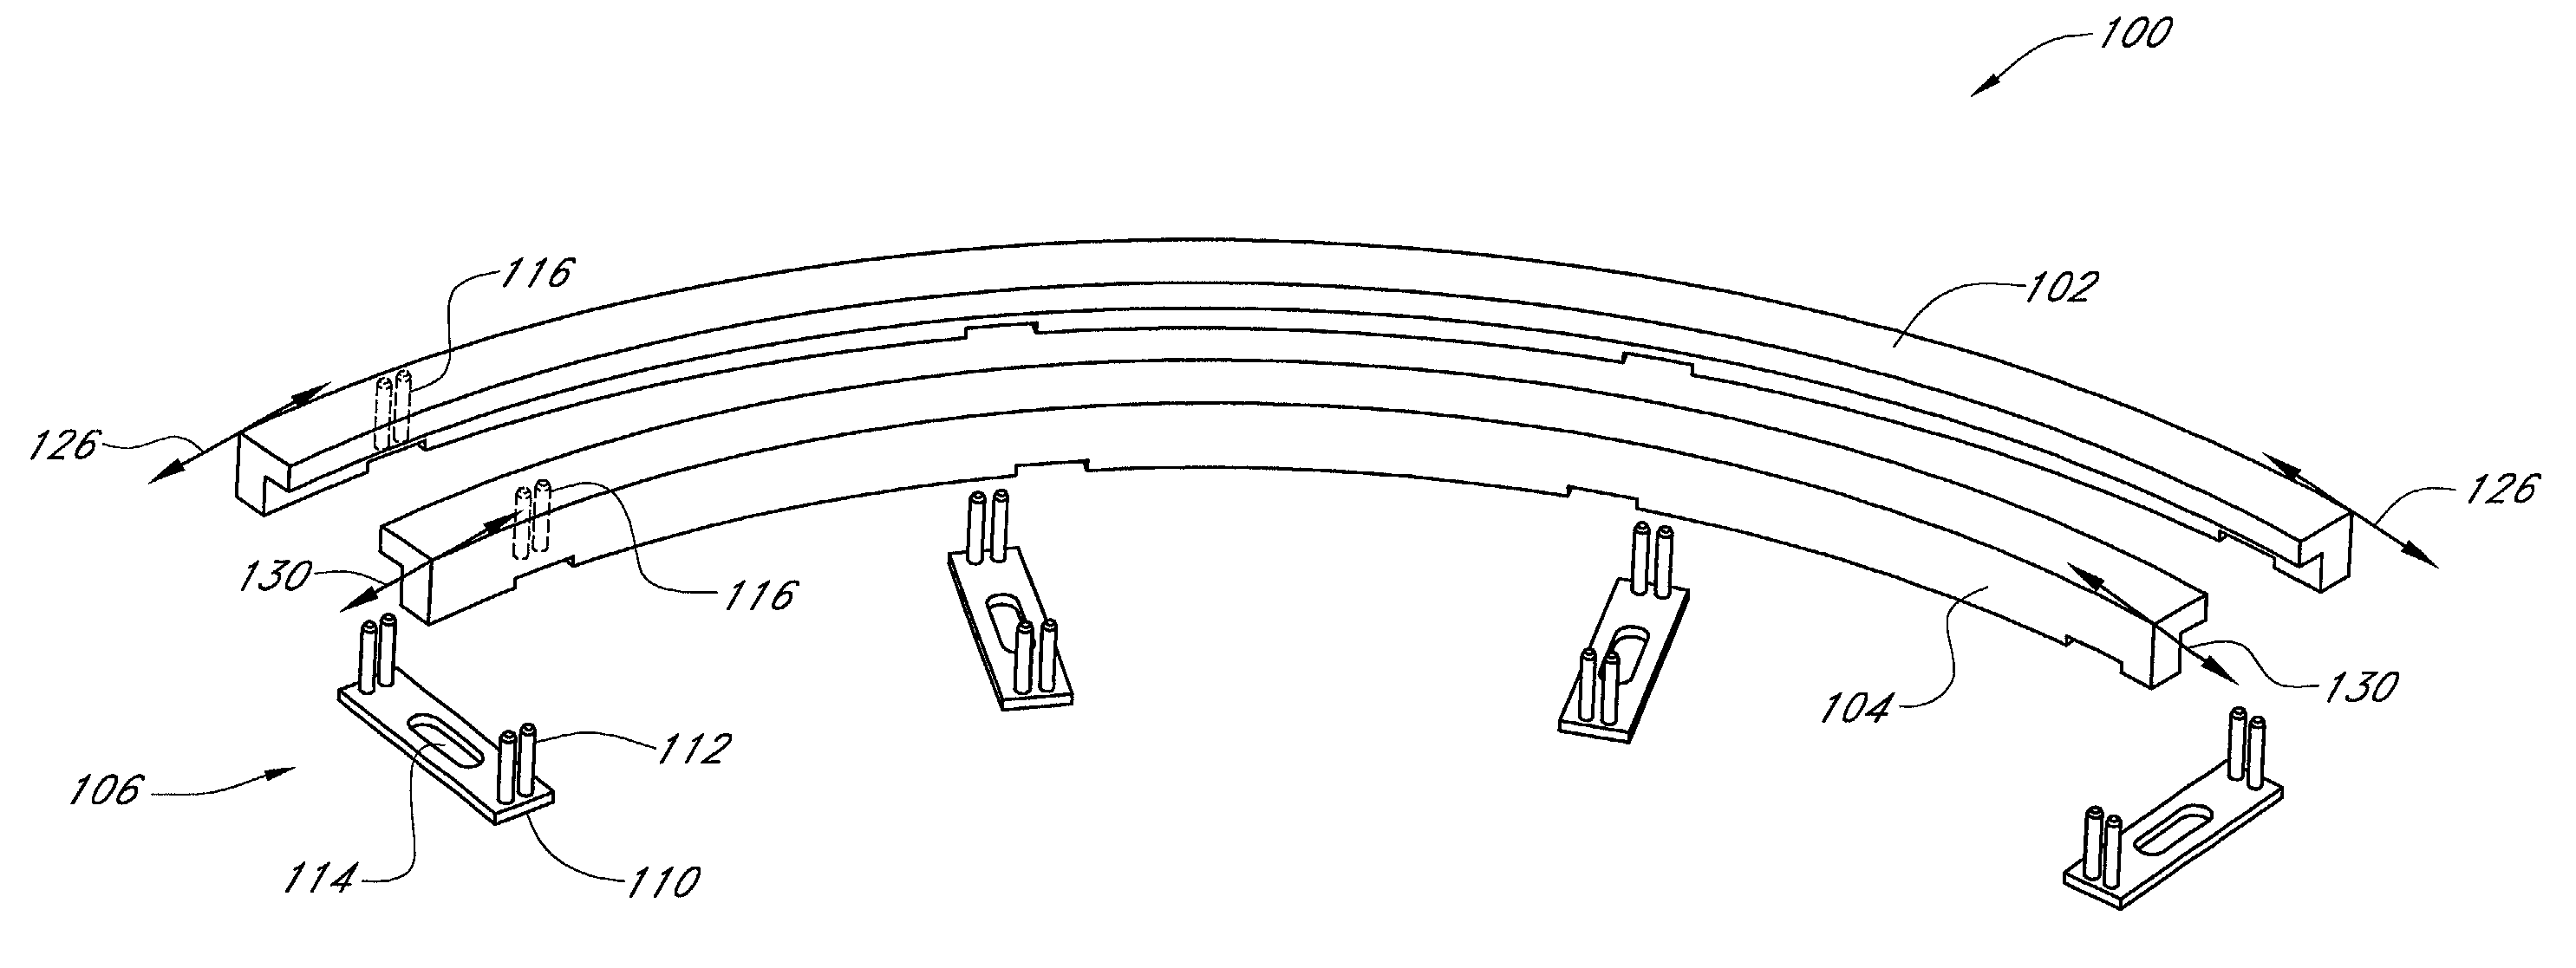 Conveyor chain guide system